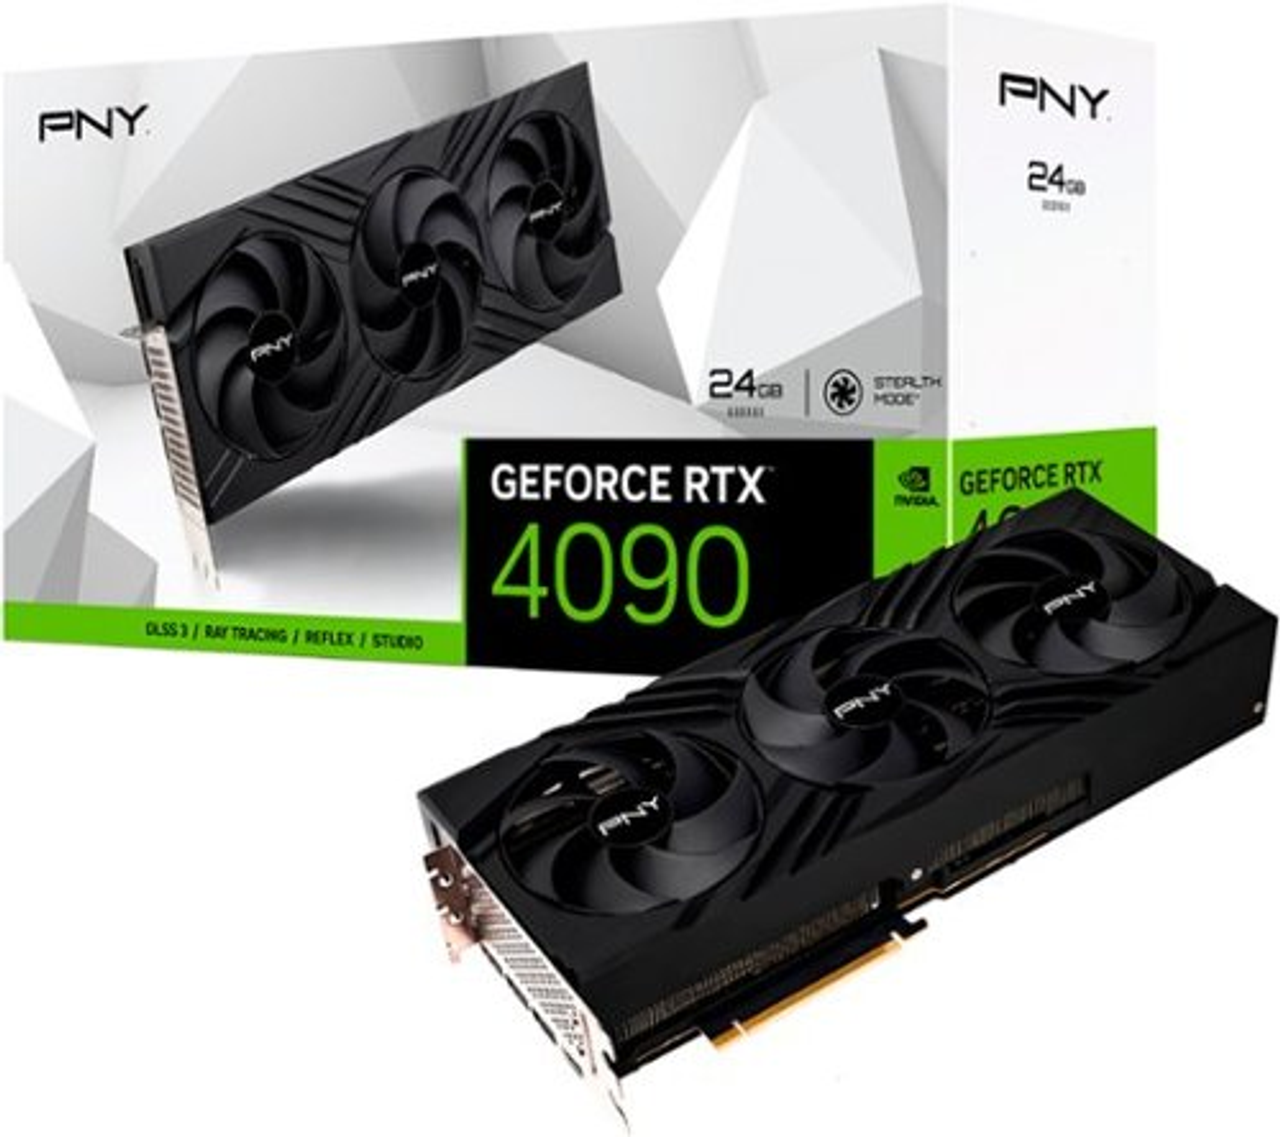 PNY - GeForce RTX 4090 24GB GDDR6X PCI Express 4.0 Graphics Card with Triple Fan and DLSS 3 - Black